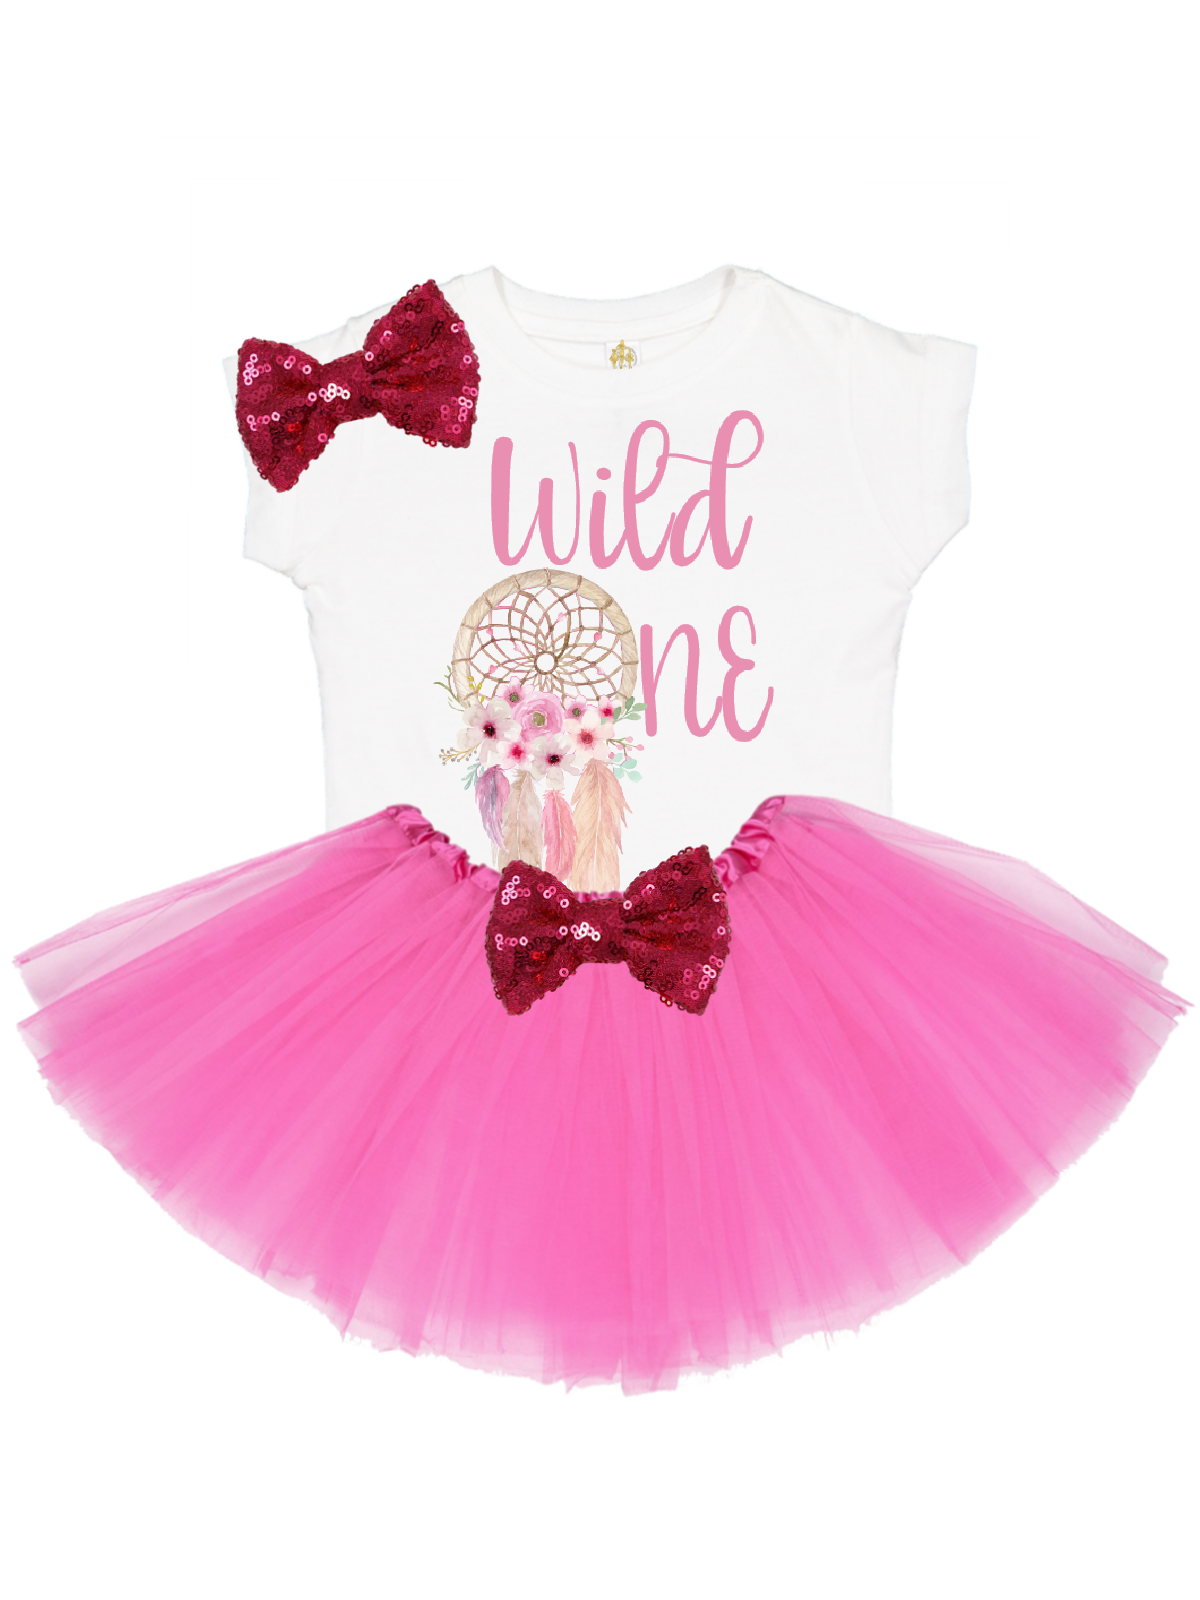 wild one dreamcatcher tutu outfit for girls in pink